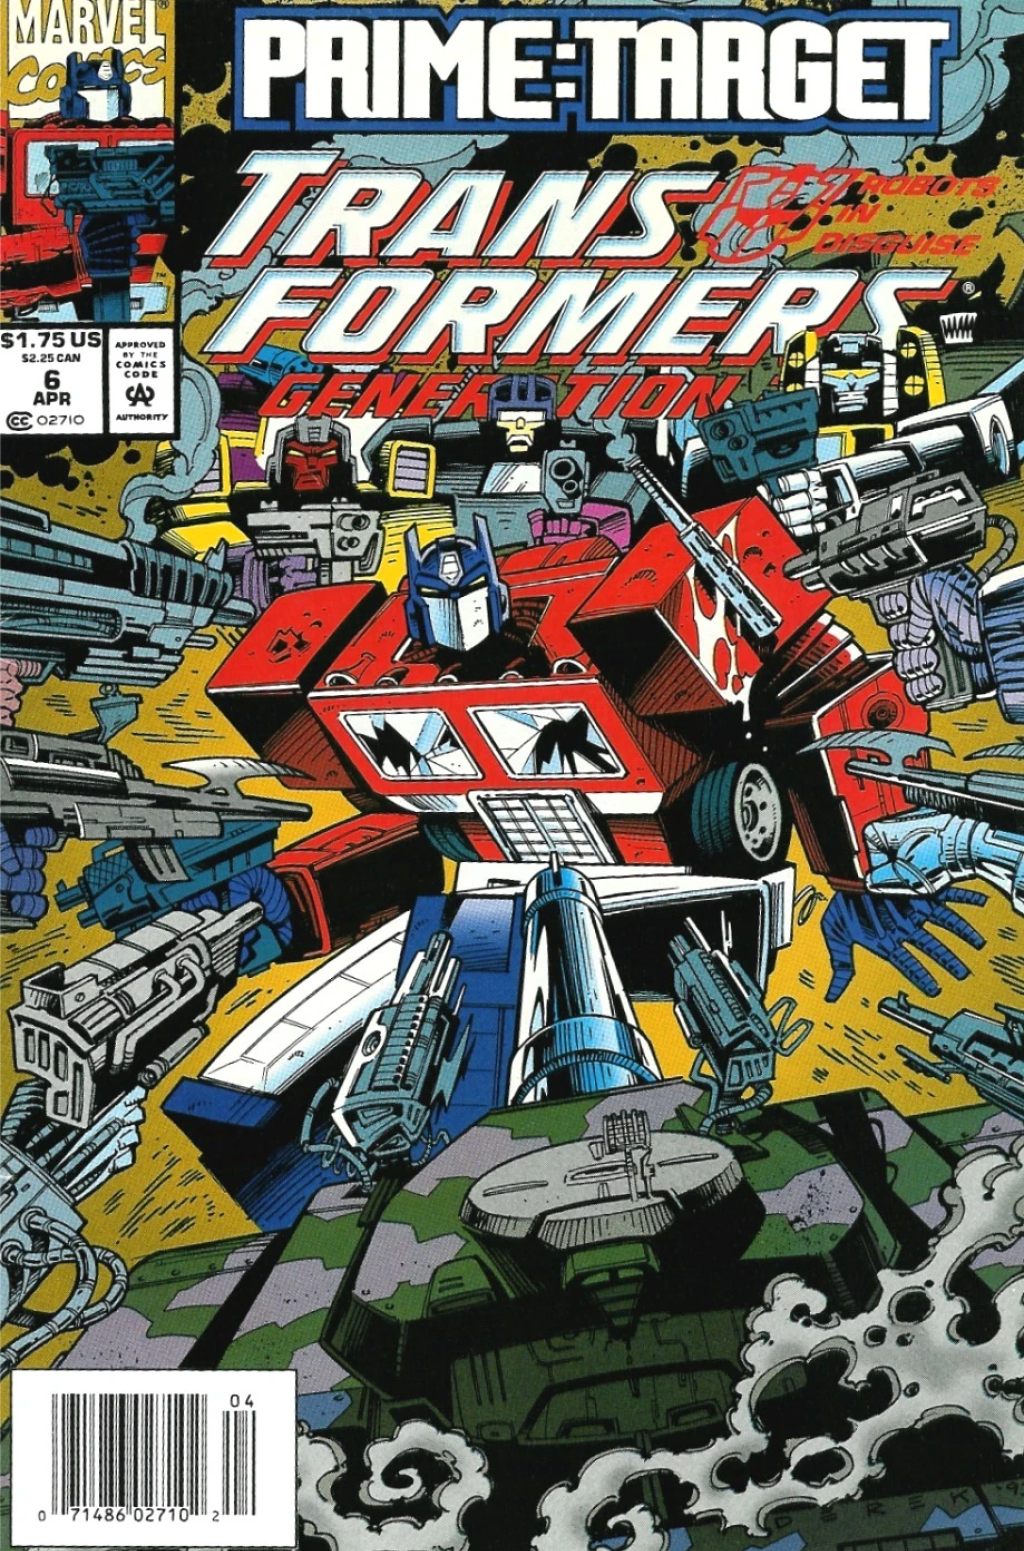 Transformers Generation 2 Vol. 1 Issue #6 "The Gathering Darkness" (1994), Marvel Comics. Words by Simon Furman. Art by Manny Galan, Jim Amash, and Sarra Mossoff.